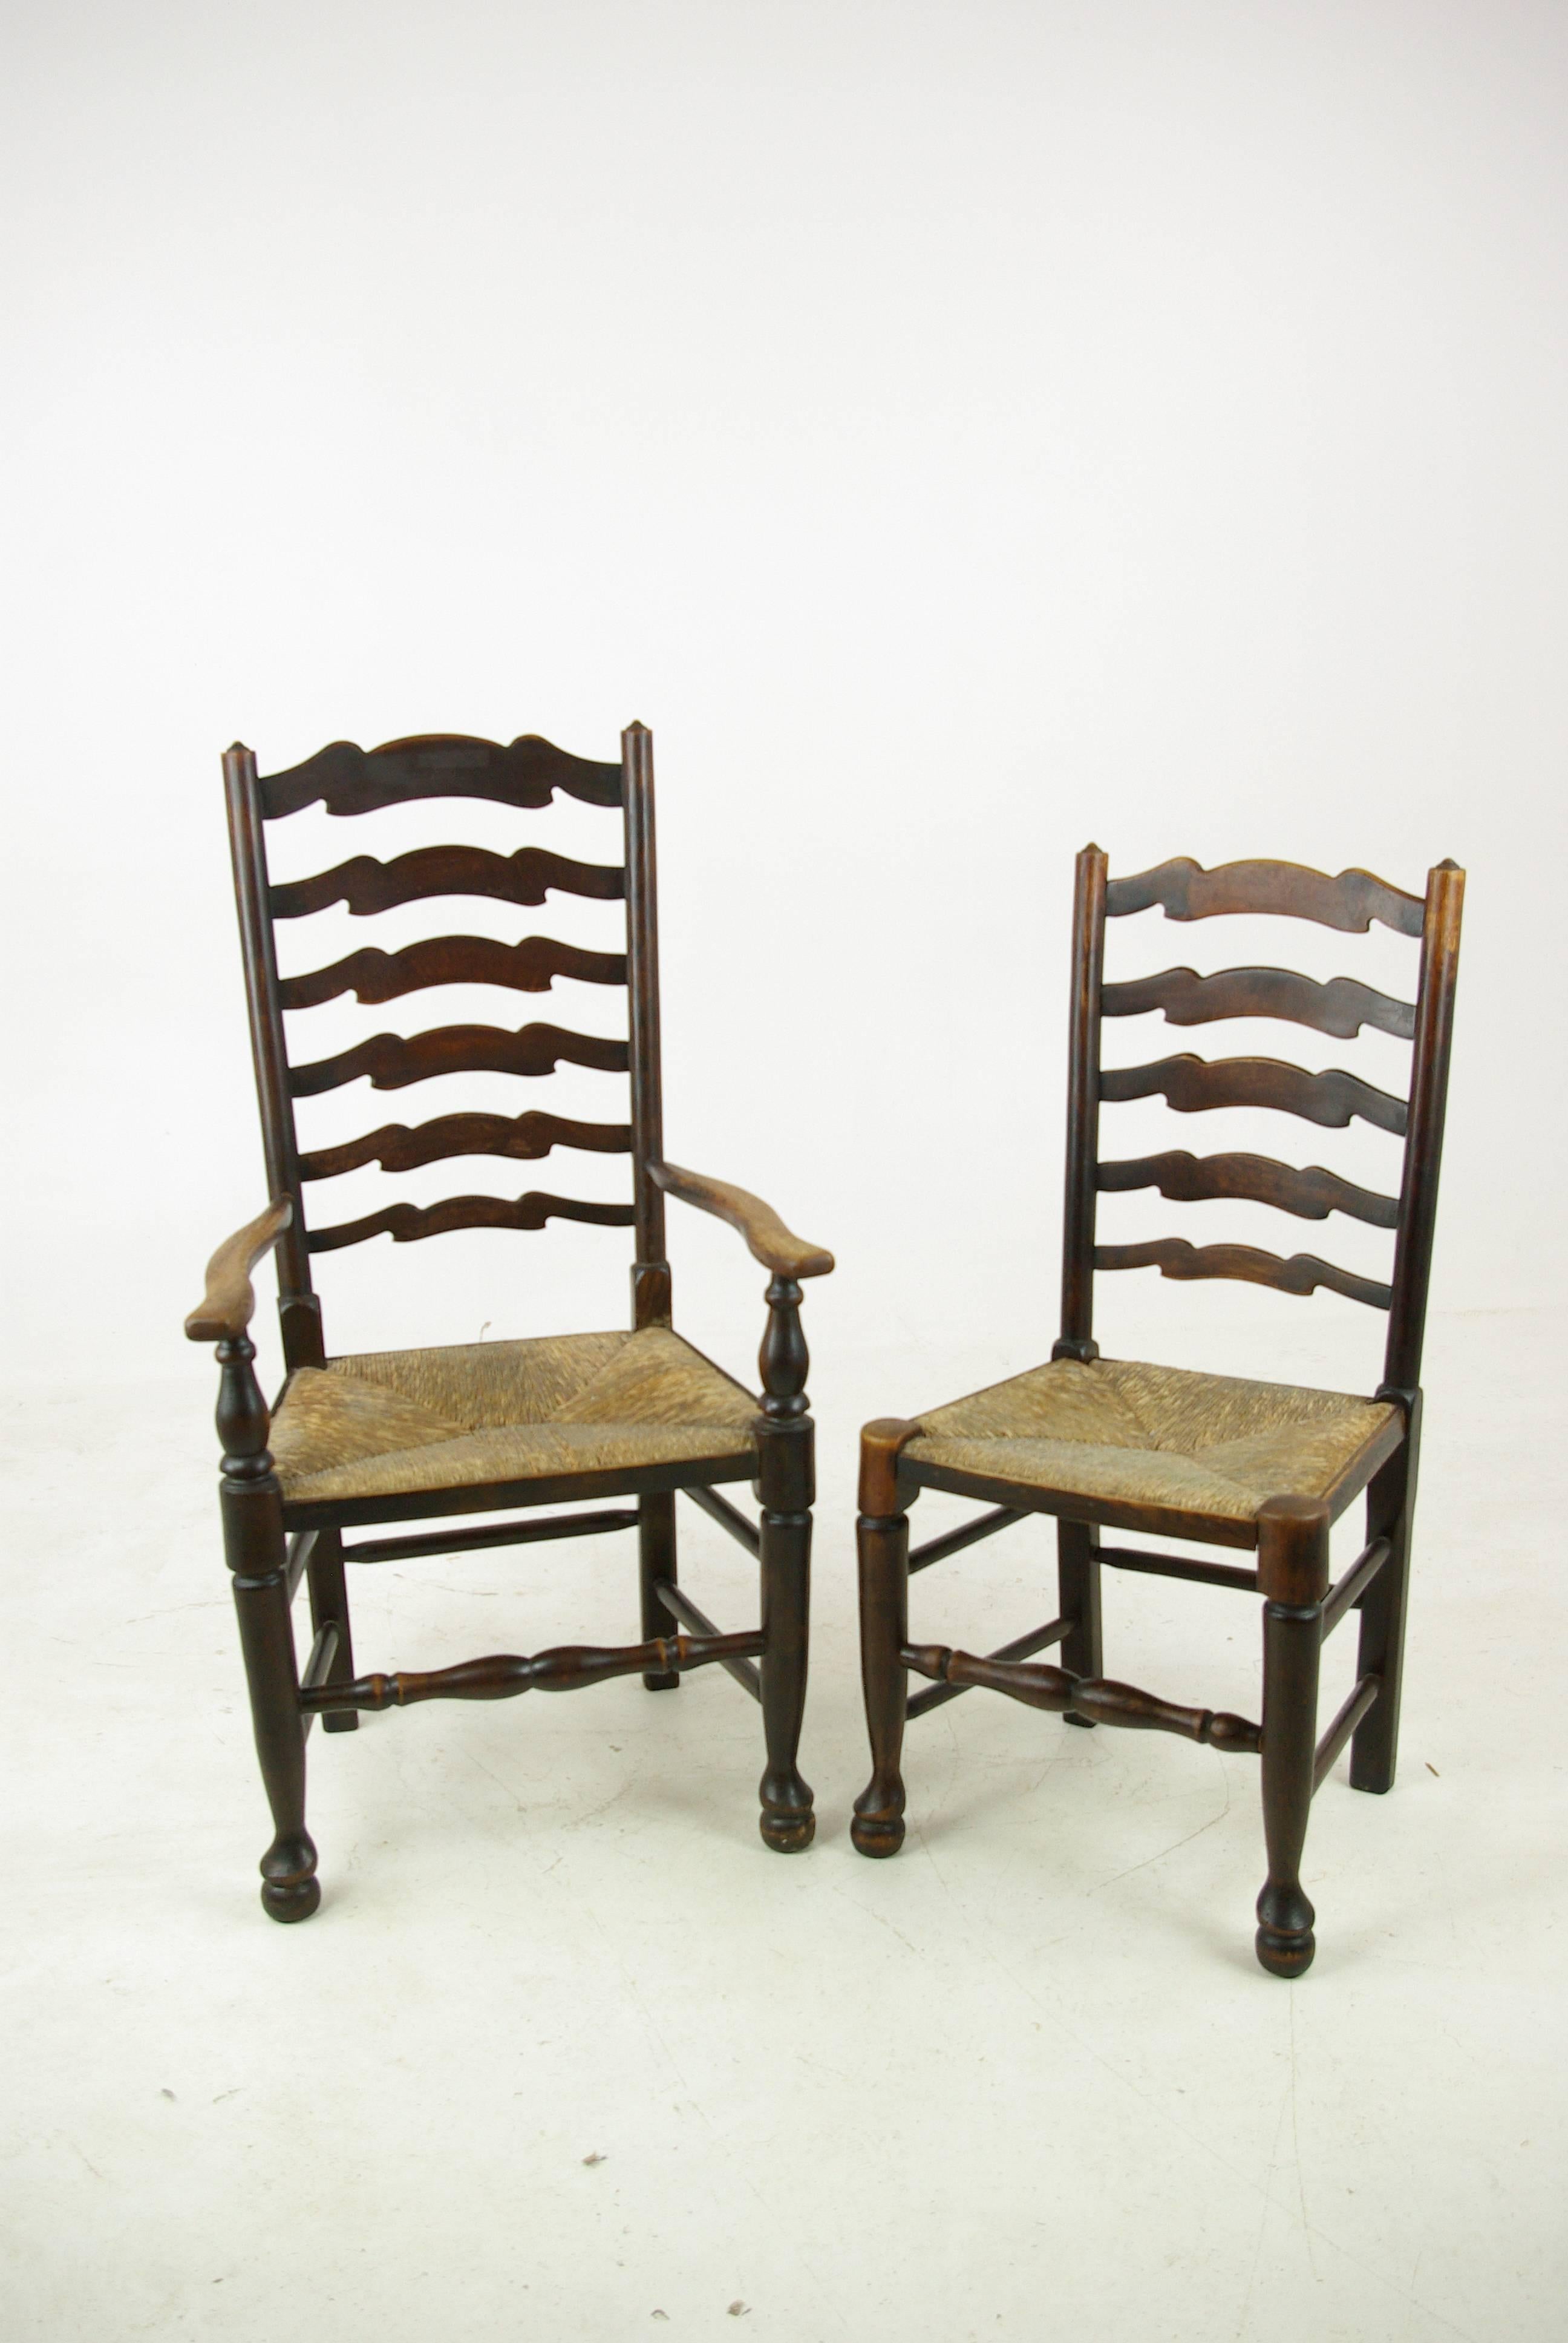 Scottish Antique Dining Chairs, Rush Chairs, Ladder Back Chairs, 1930s, B1014  REDUCED!!!